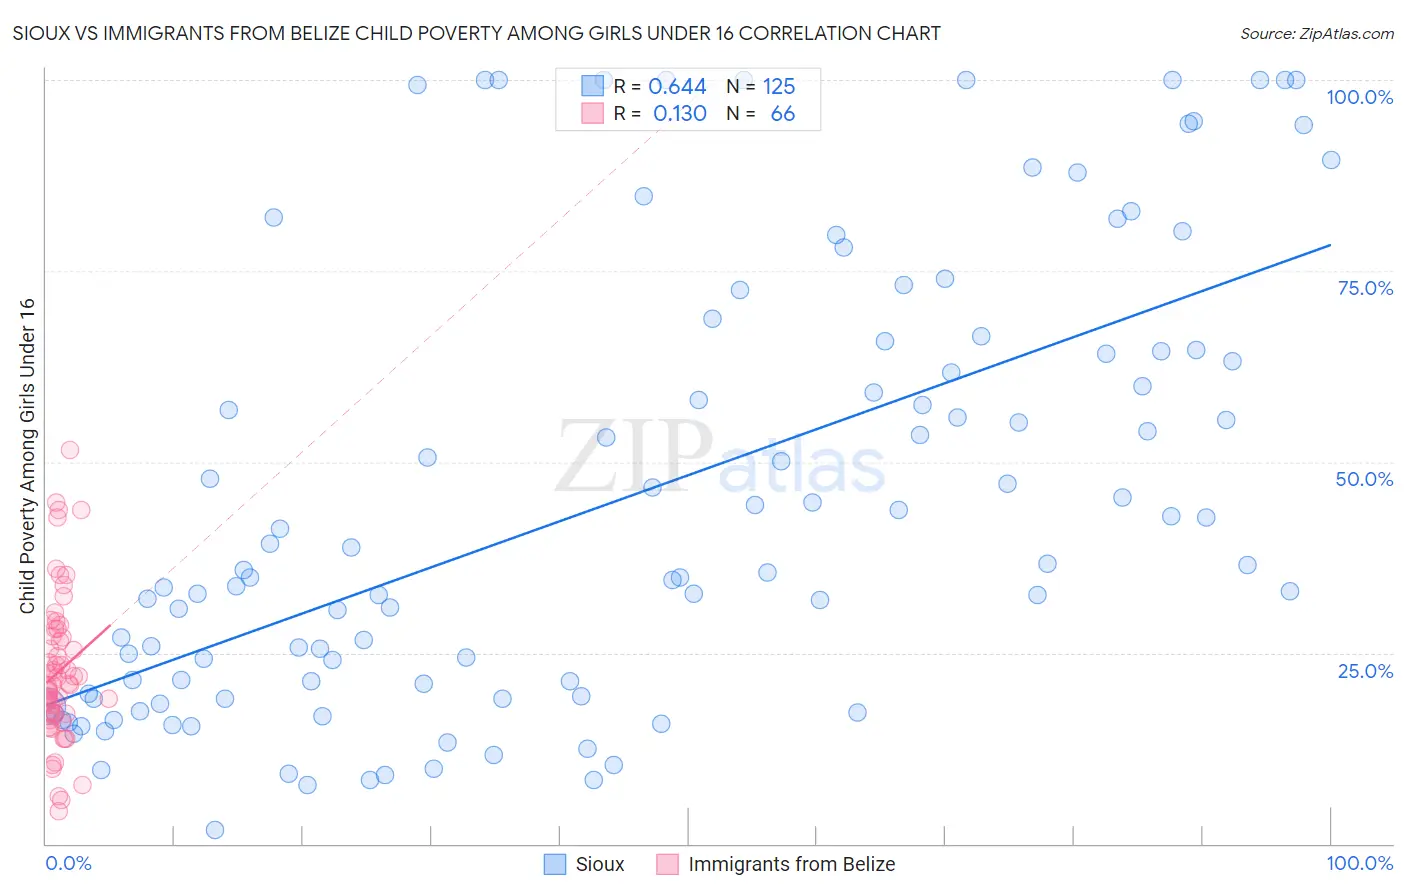 Sioux vs Immigrants from Belize Child Poverty Among Girls Under 16